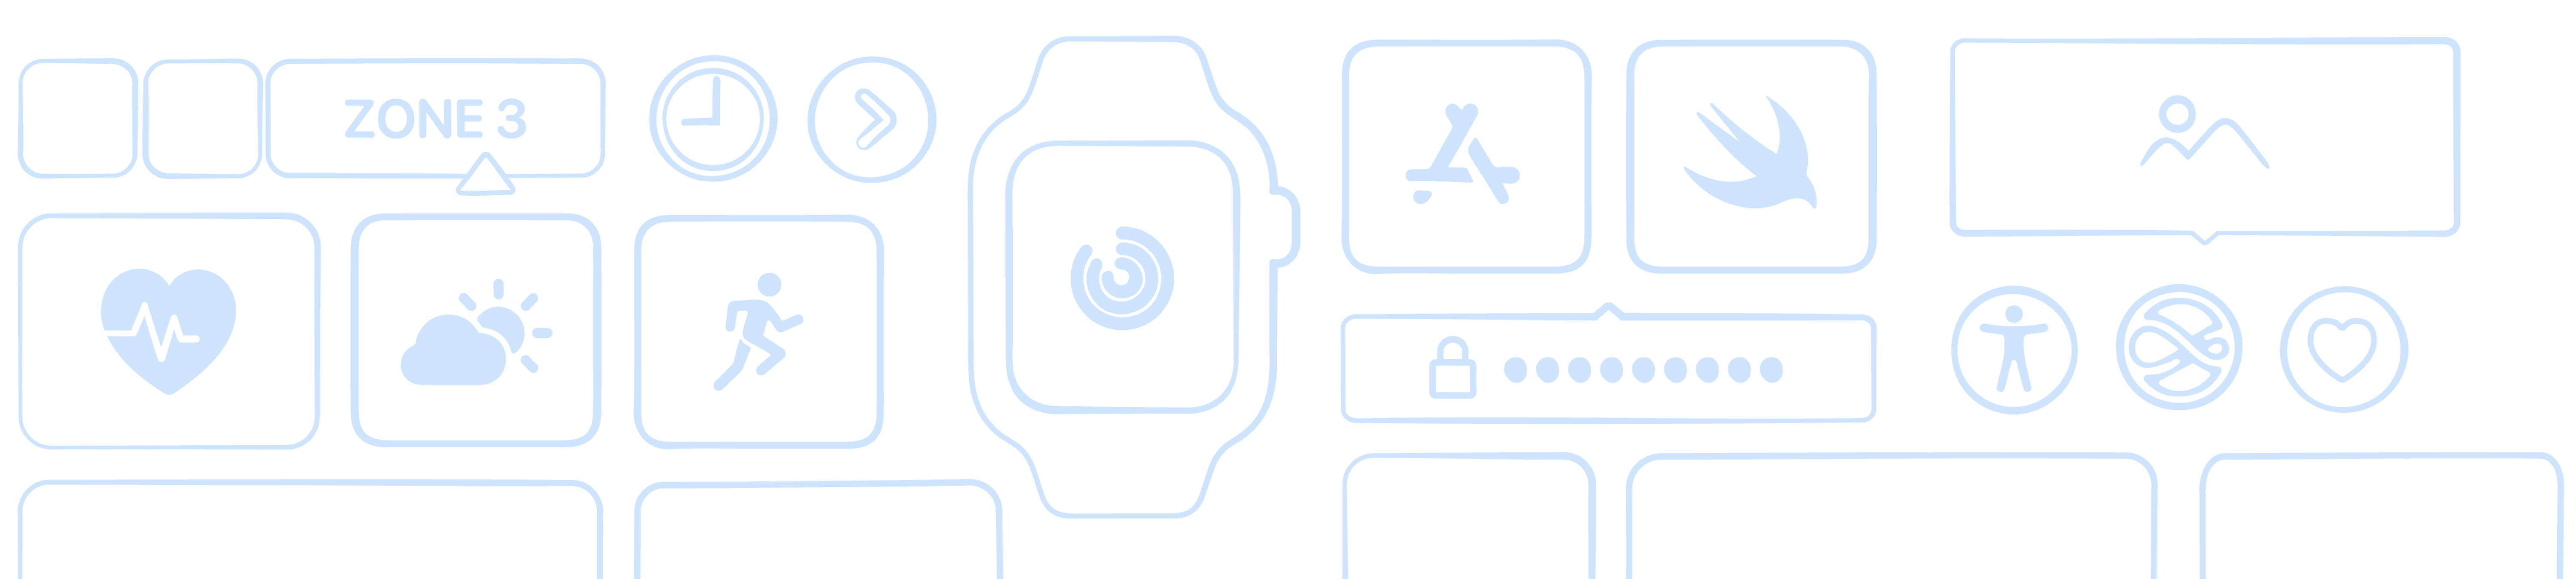 Storyboard of a new watchOS application and technologies.